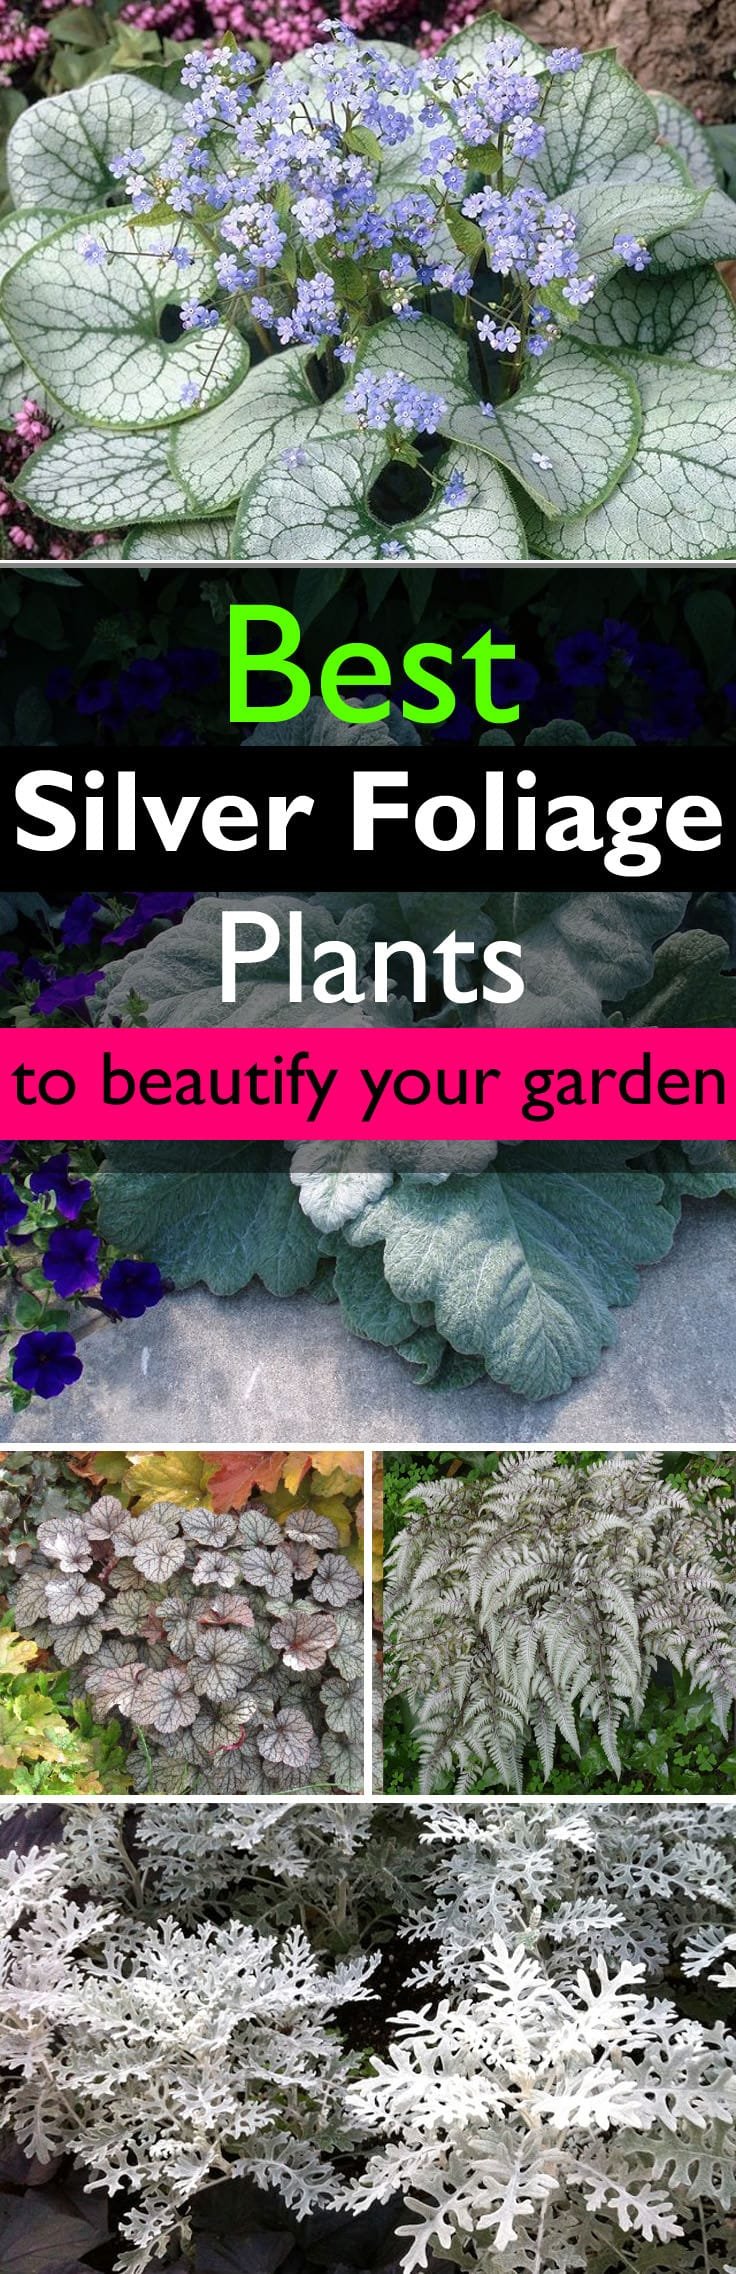 Silver foliage plants have amazing quality-- they can highlight other plants and flowers in the garden. Learn more about them and find out the best you can grow.